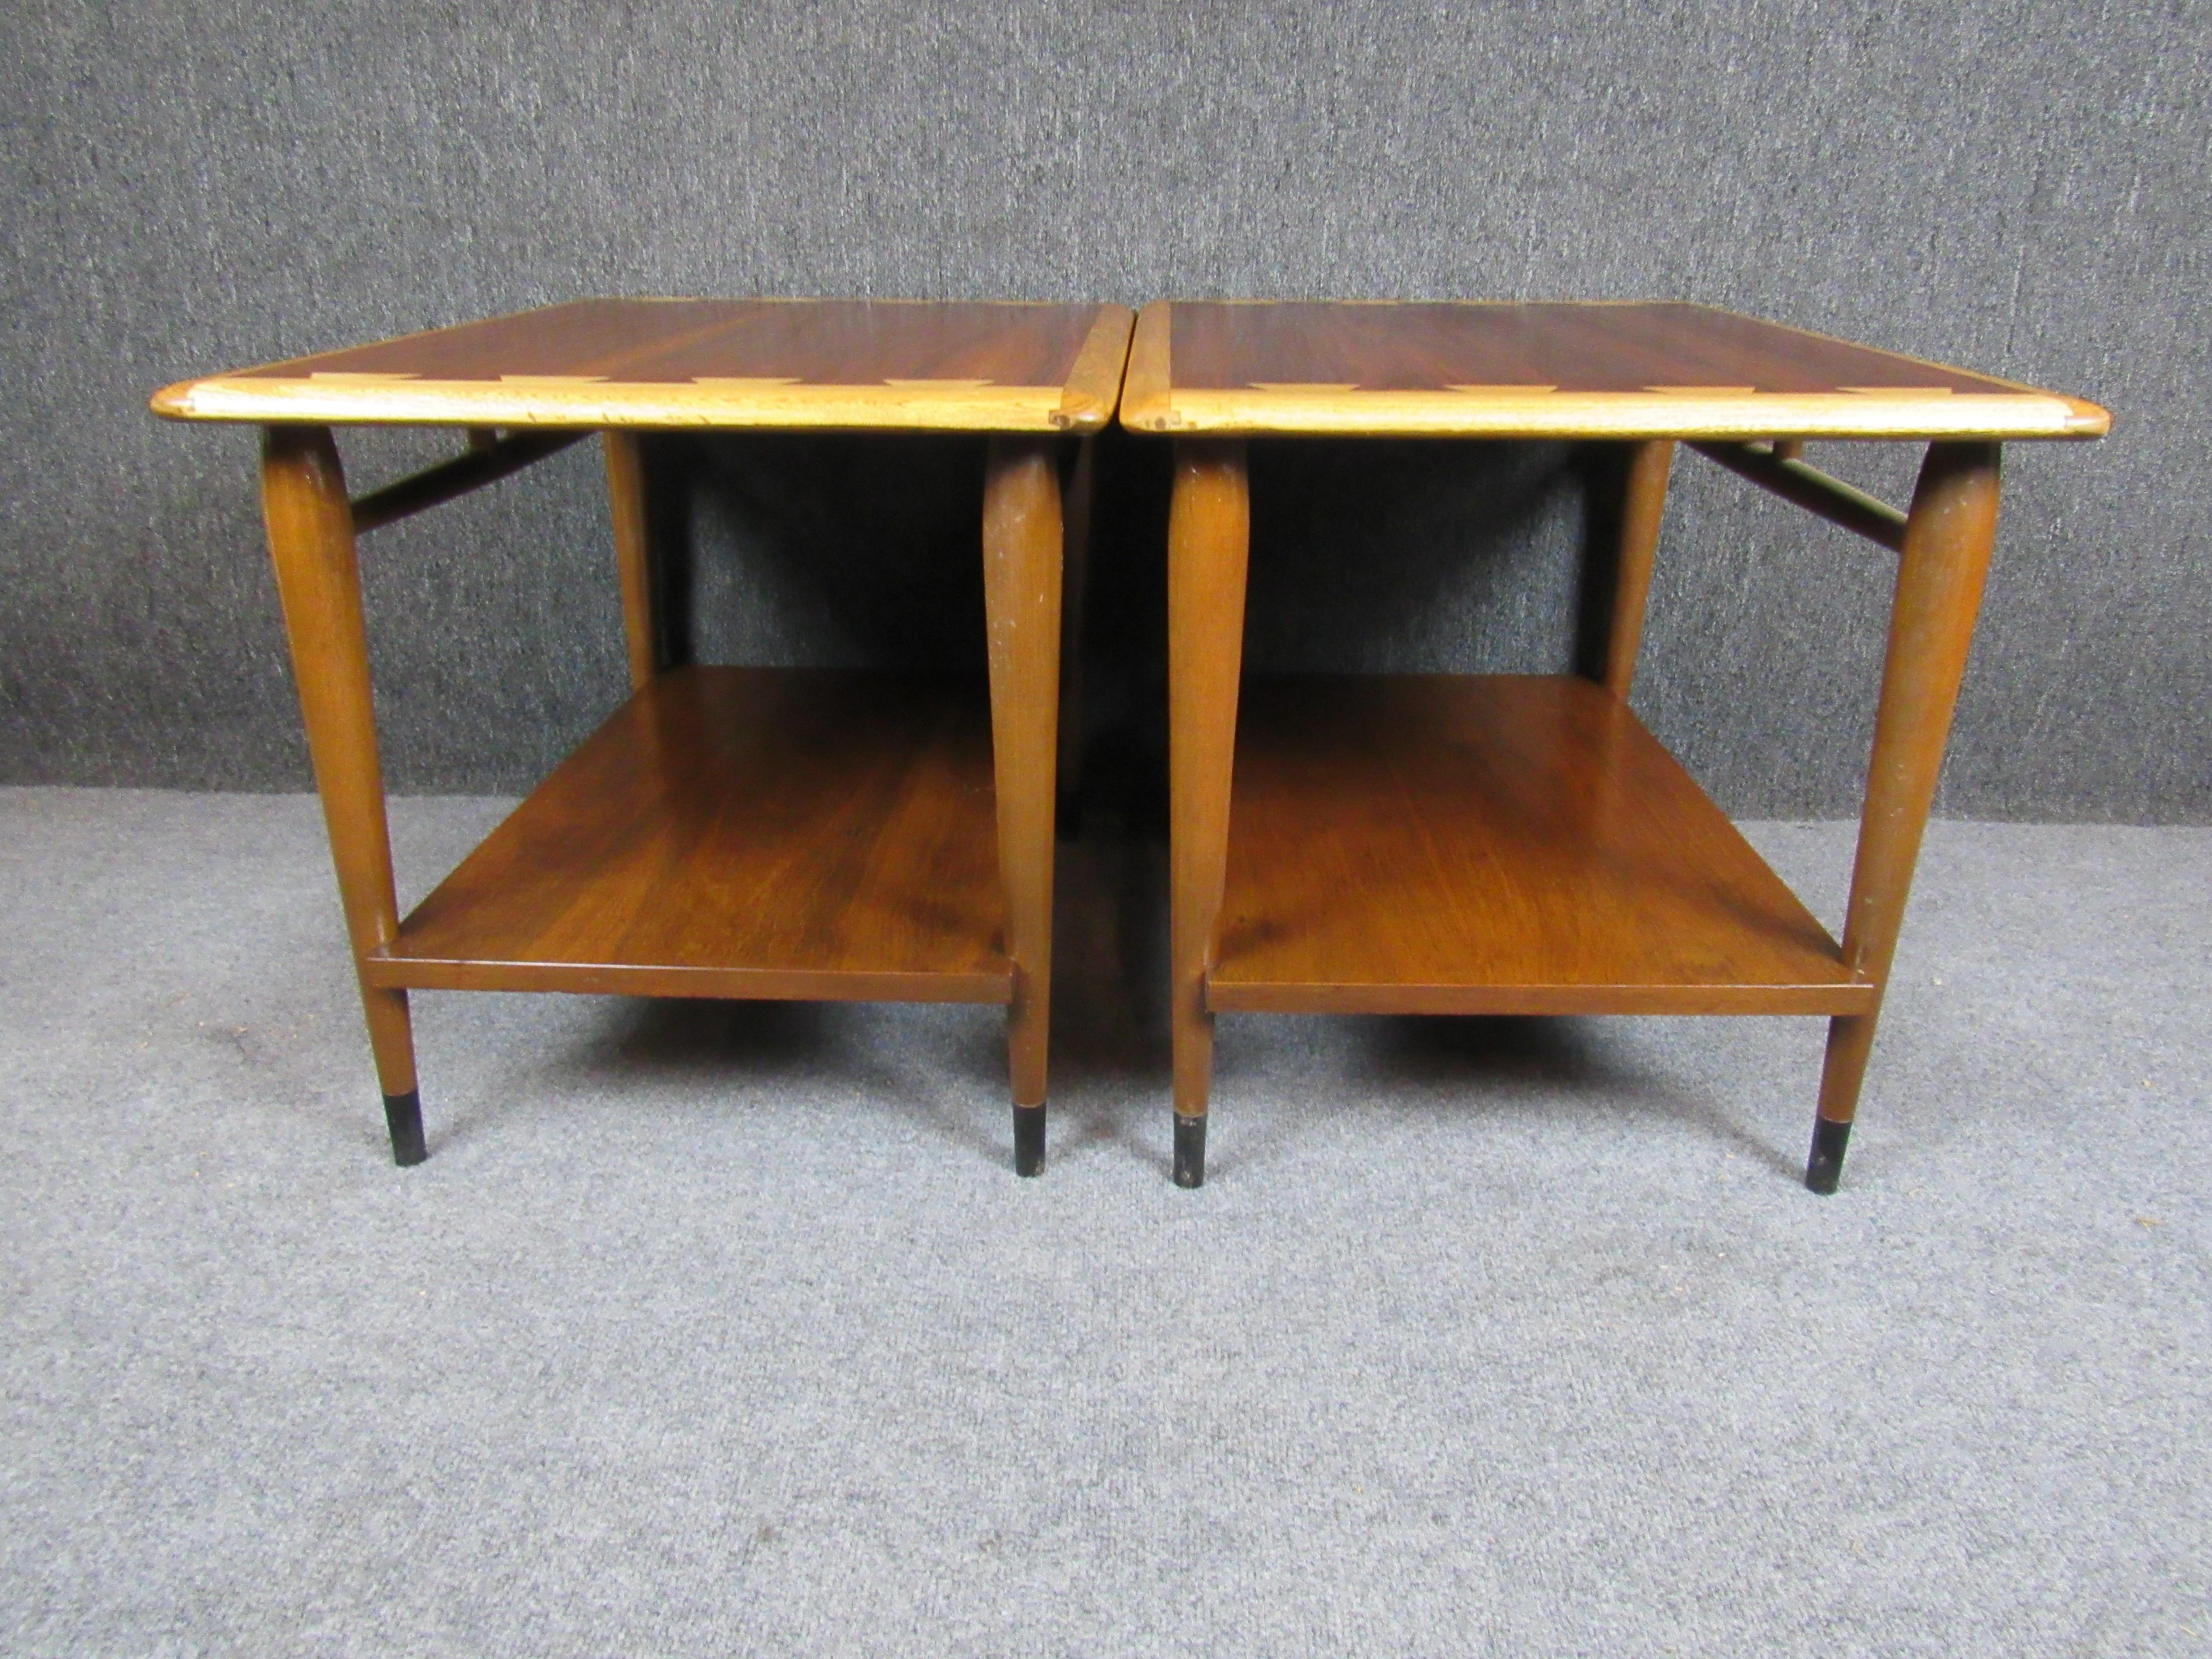 Pair of Mid-Century Modern Side Tables by Lane In Good Condition For Sale In Brooklyn, NY